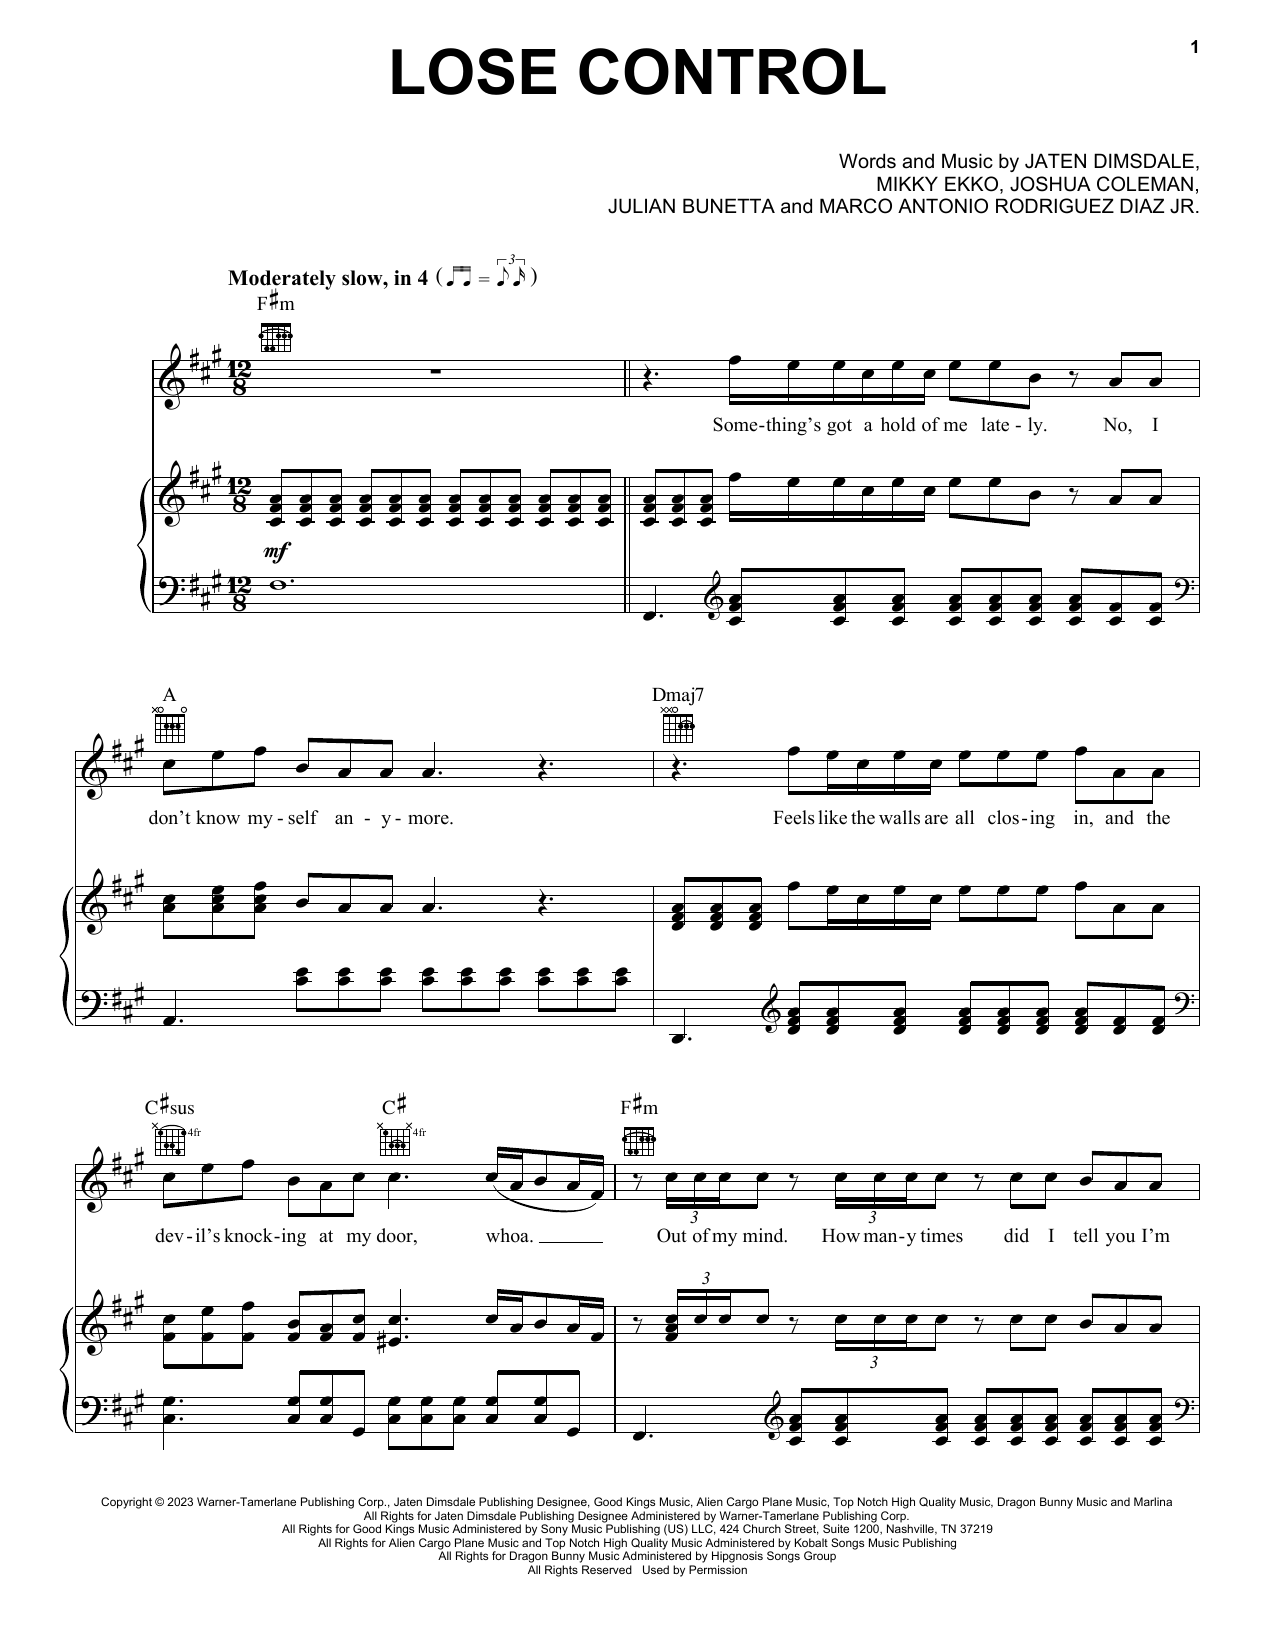 Teddy Swims Lose Control sheet music notes printable PDF score